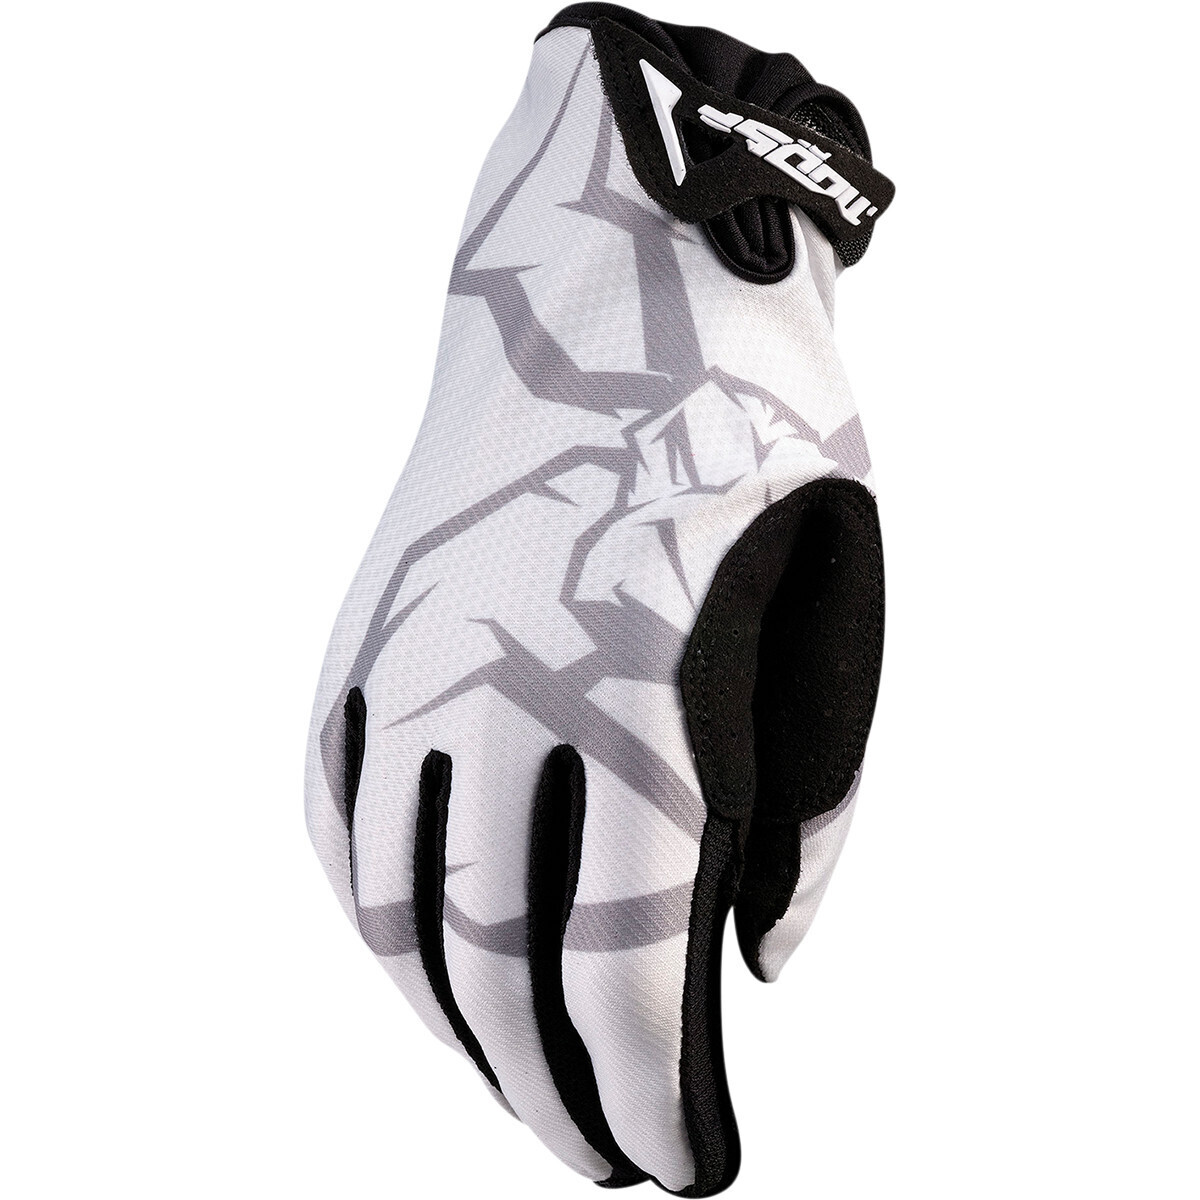 MOOSE RACING SOFT-GOODS
GLOVE AGROID PRO WH